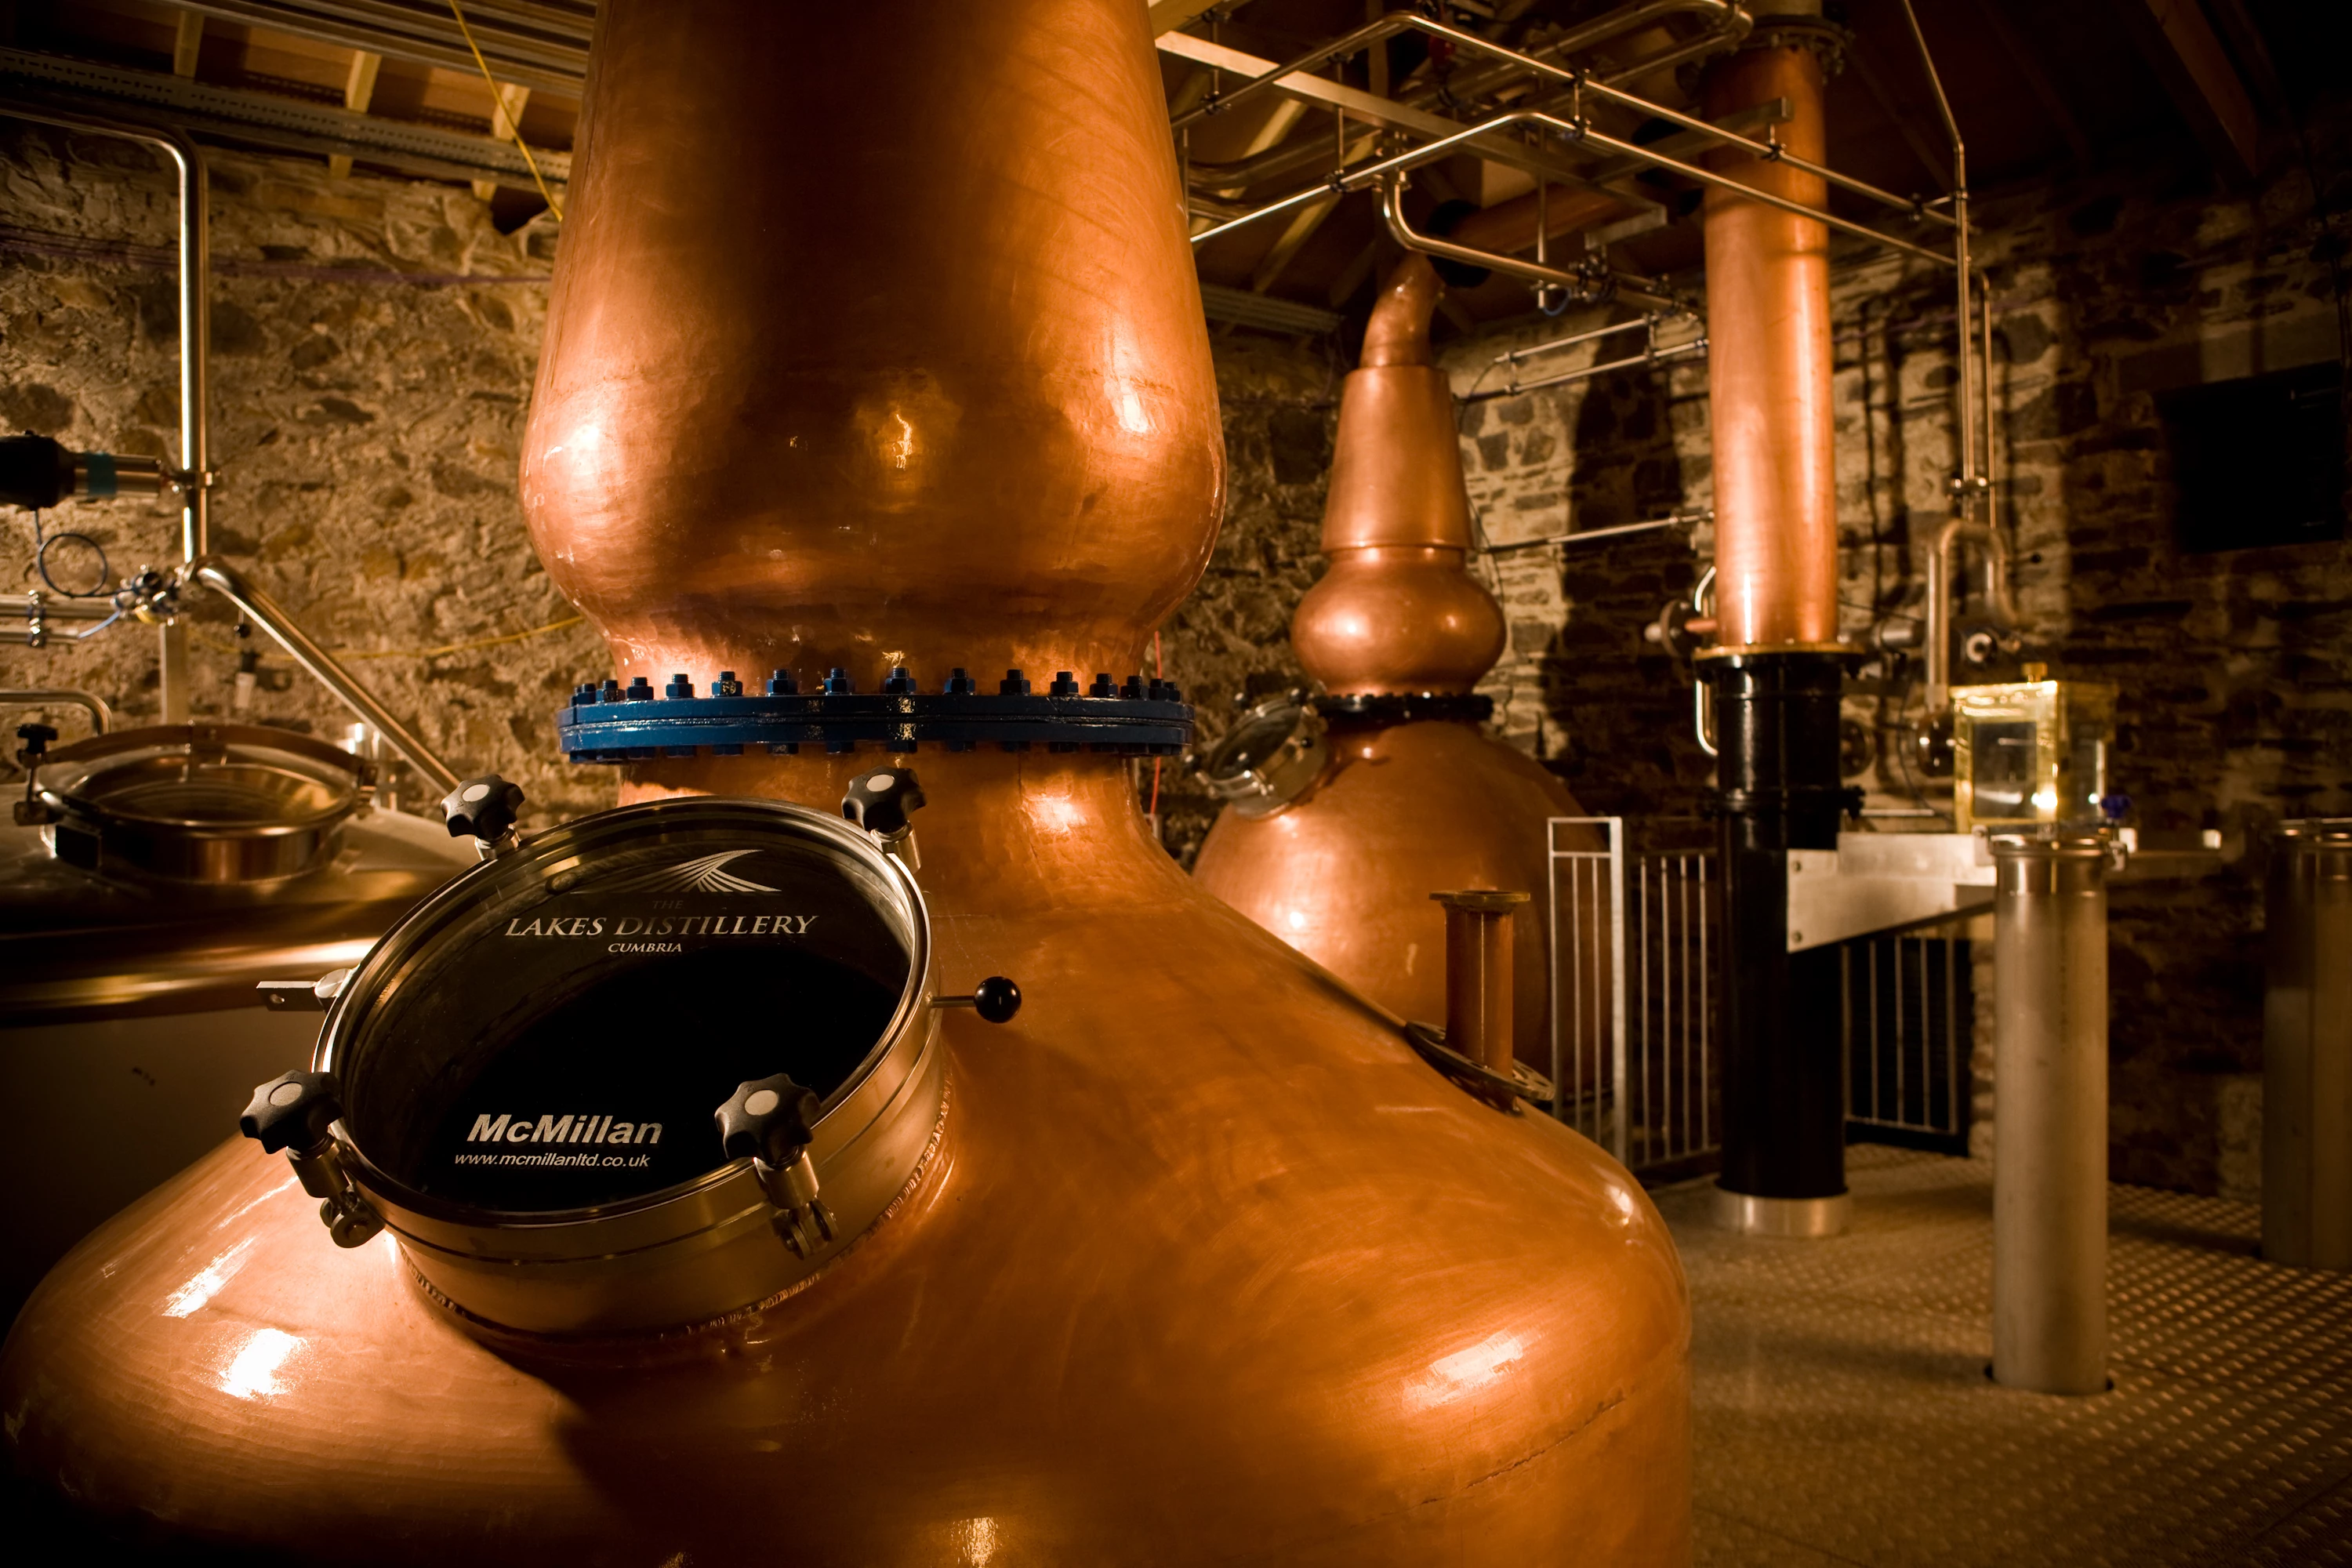 The Lakes Distillery was set up in September 2011 by COO Paul Currie